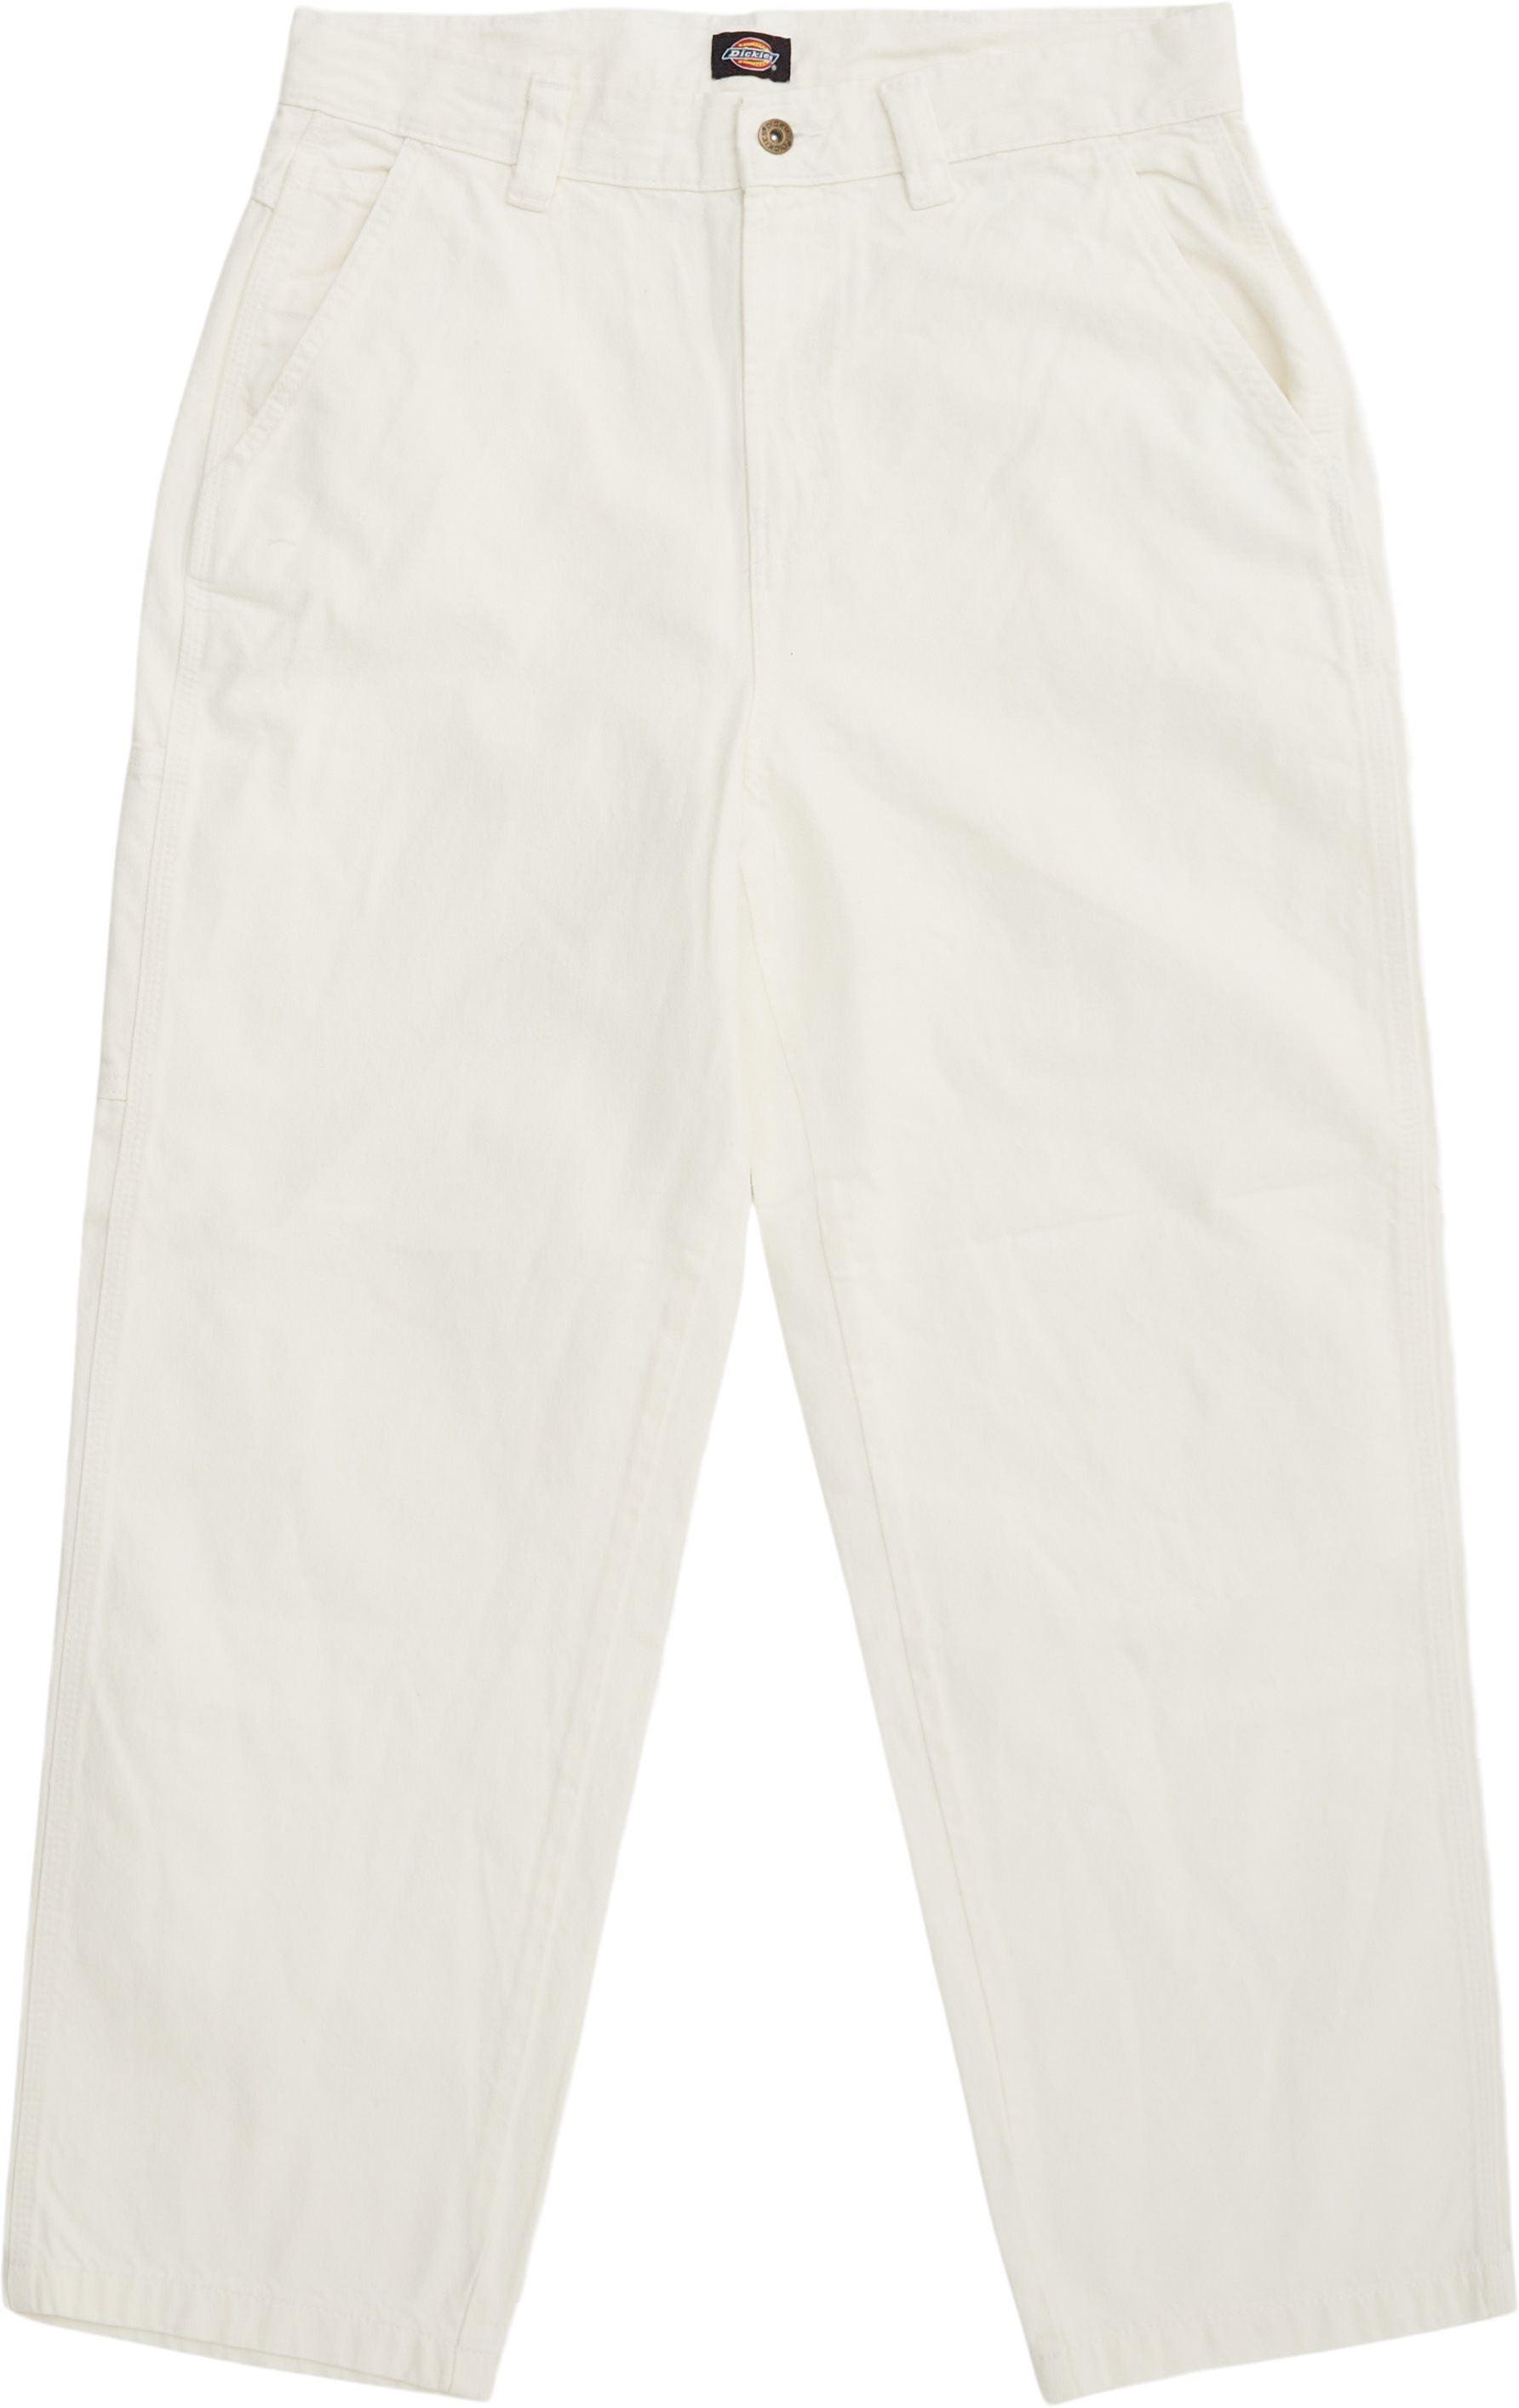 Dickies Jeans MADISON PANT DK0A4YECWHX White